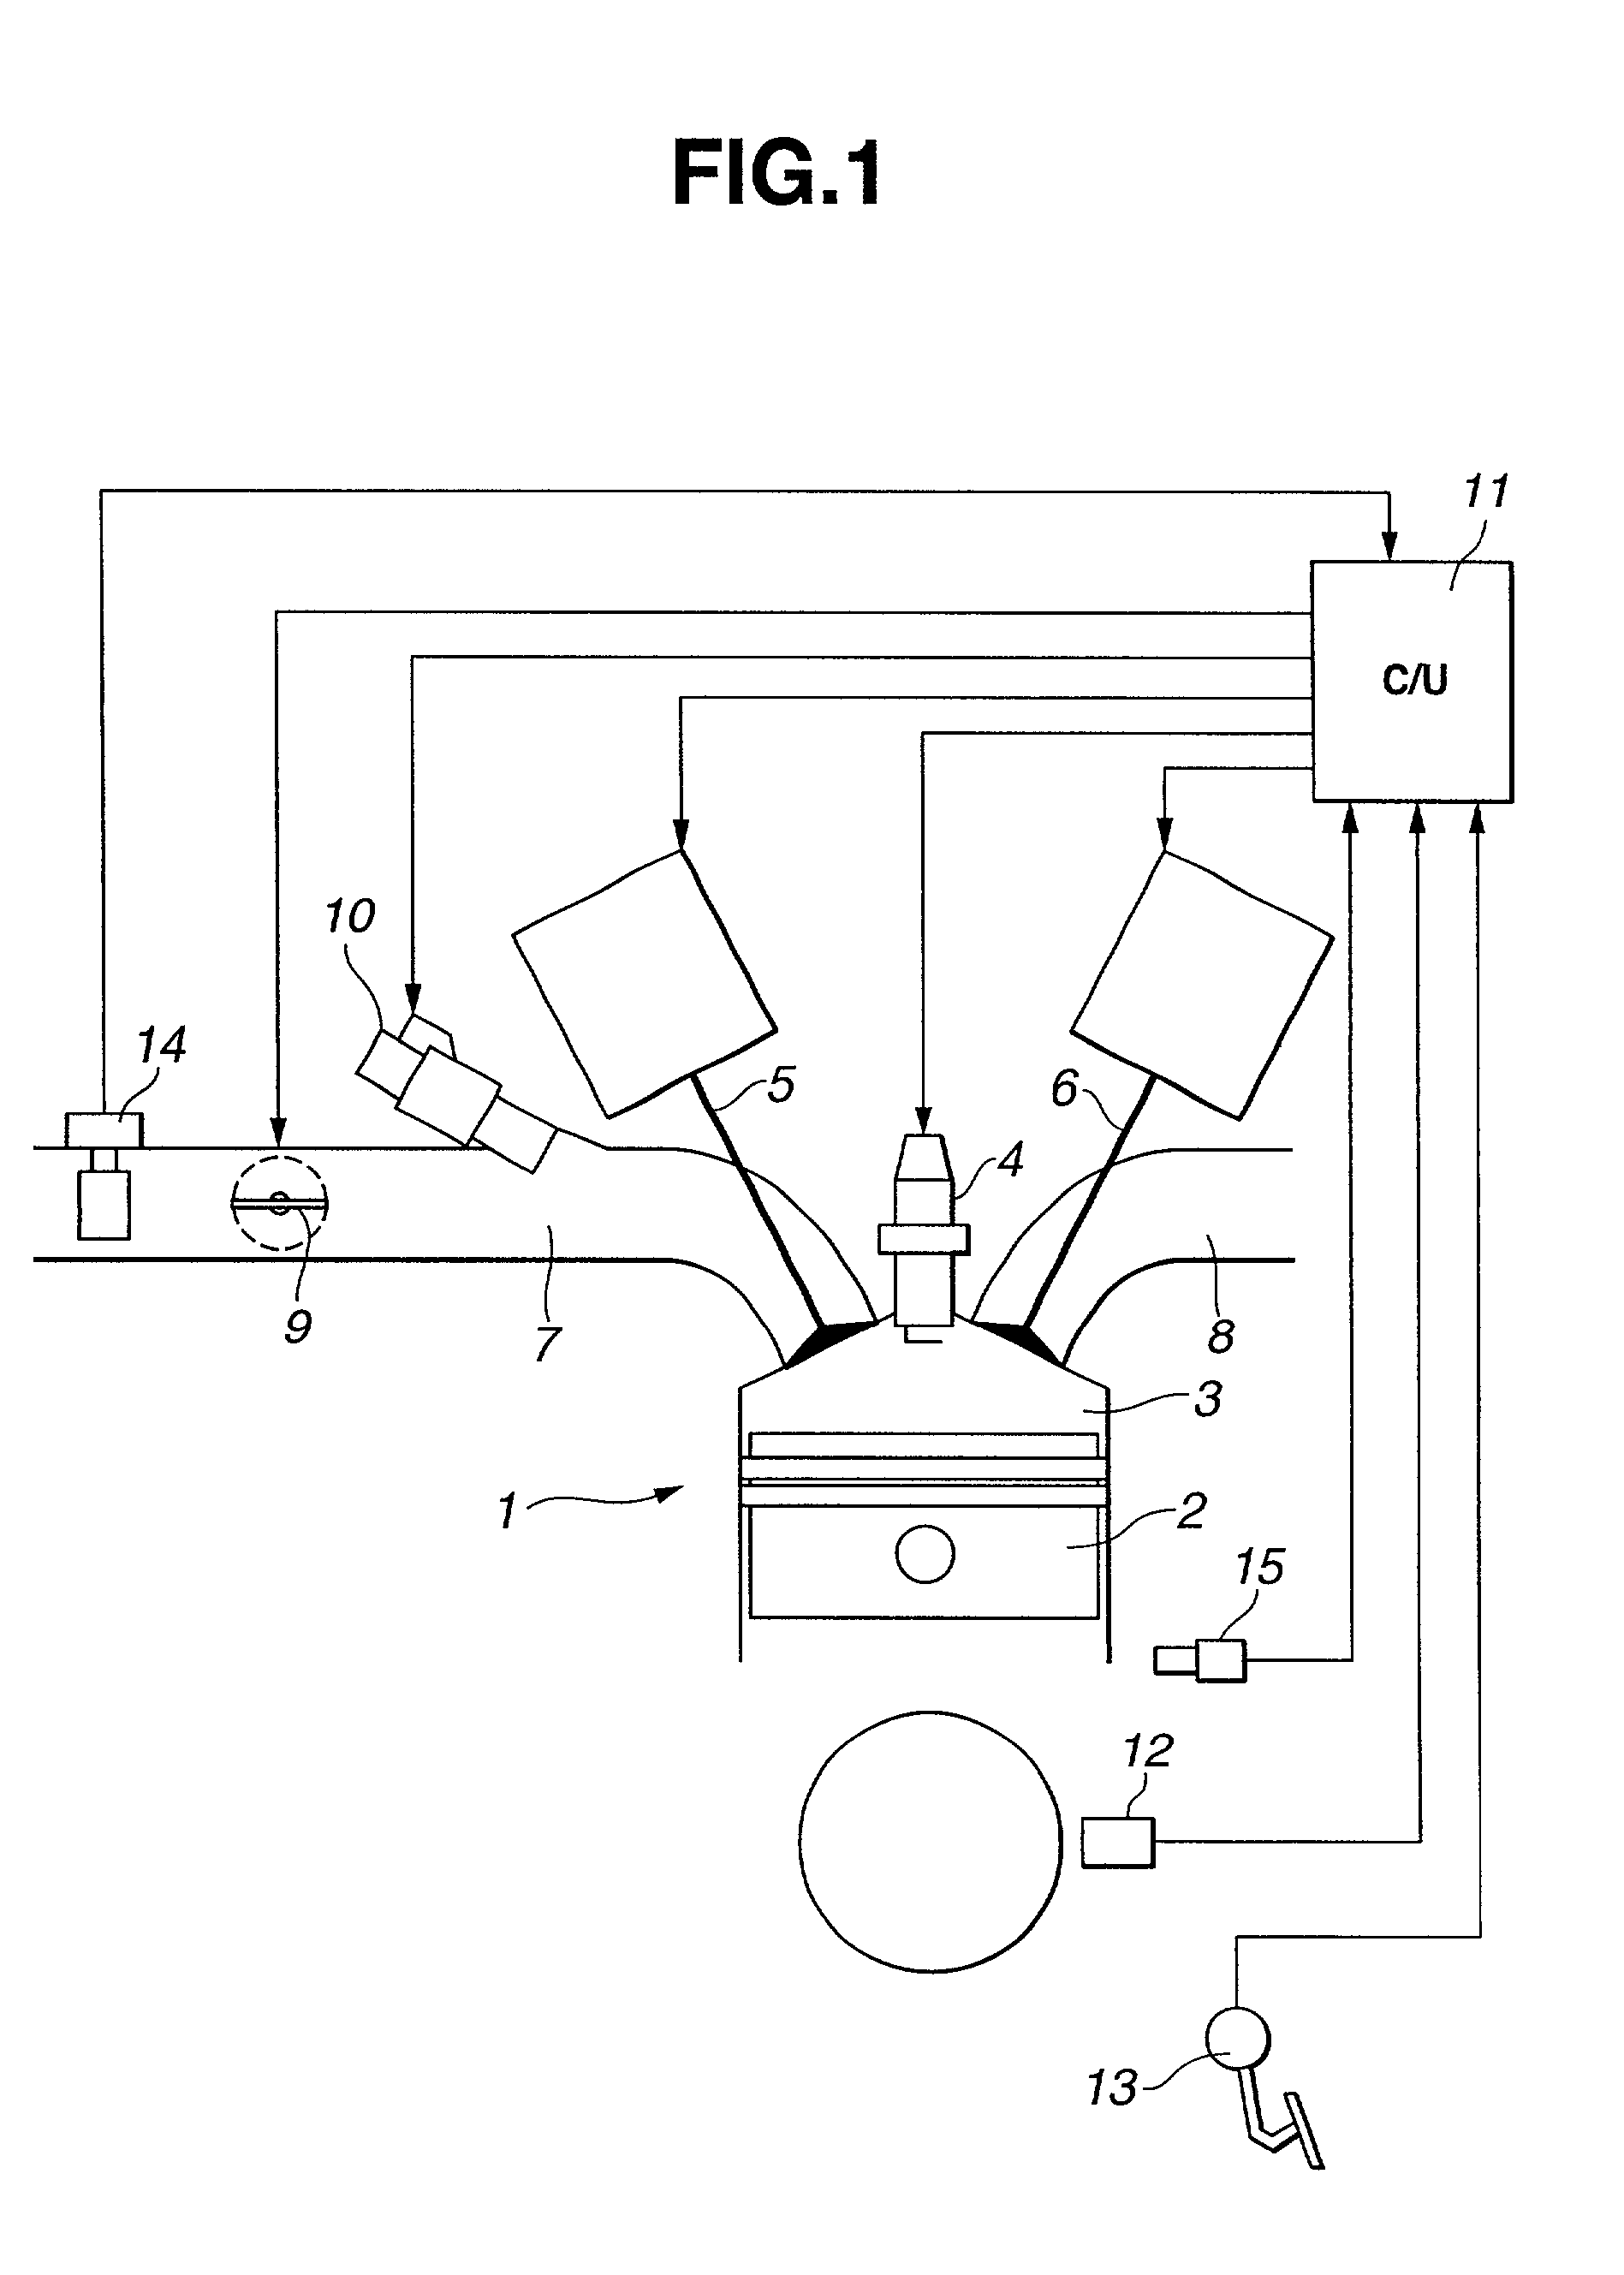 Control system for controlling variable valve type internal combustion engine